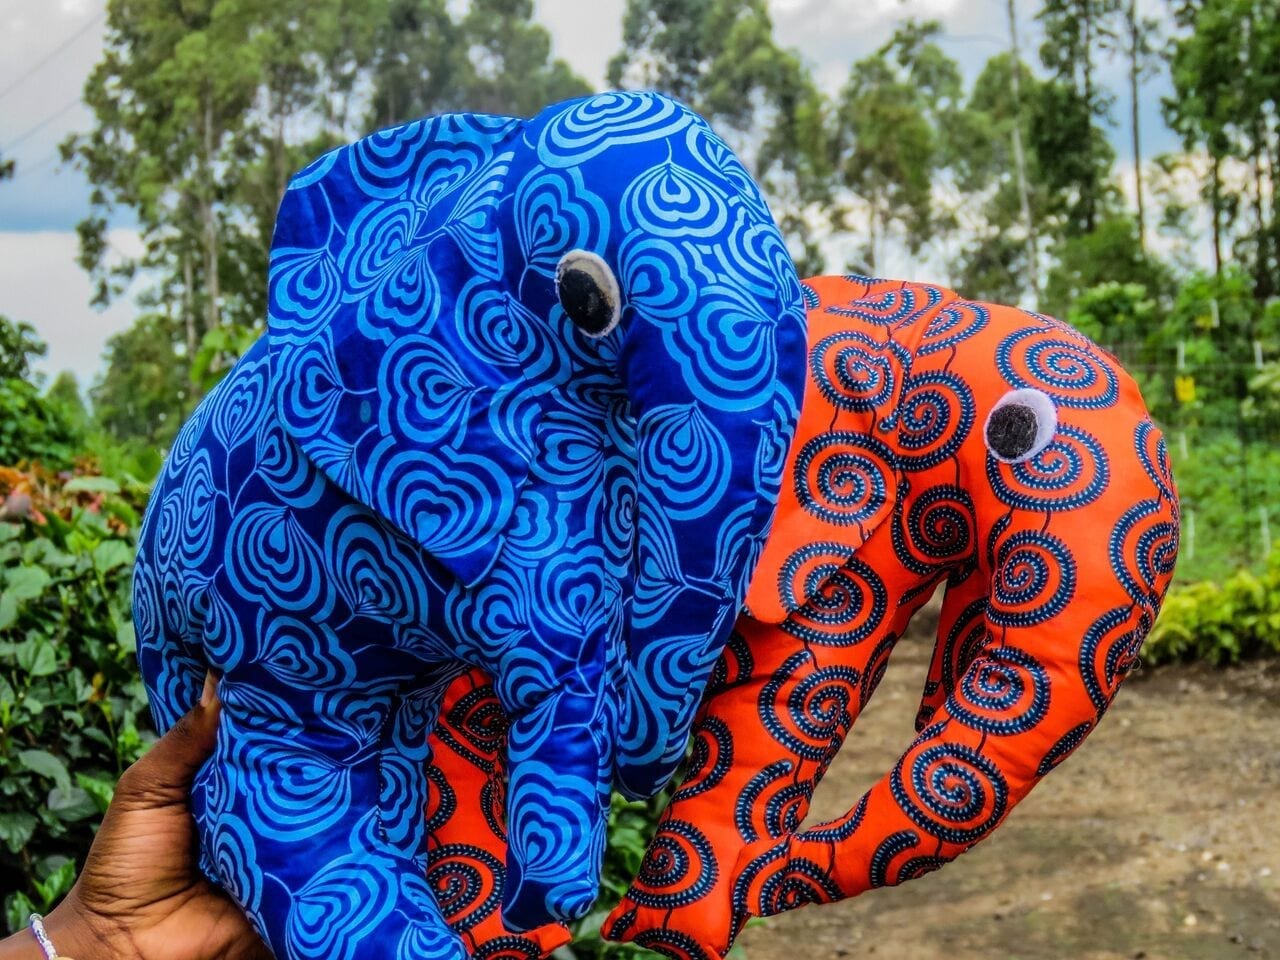 plush elephants made at the Widow's workshop